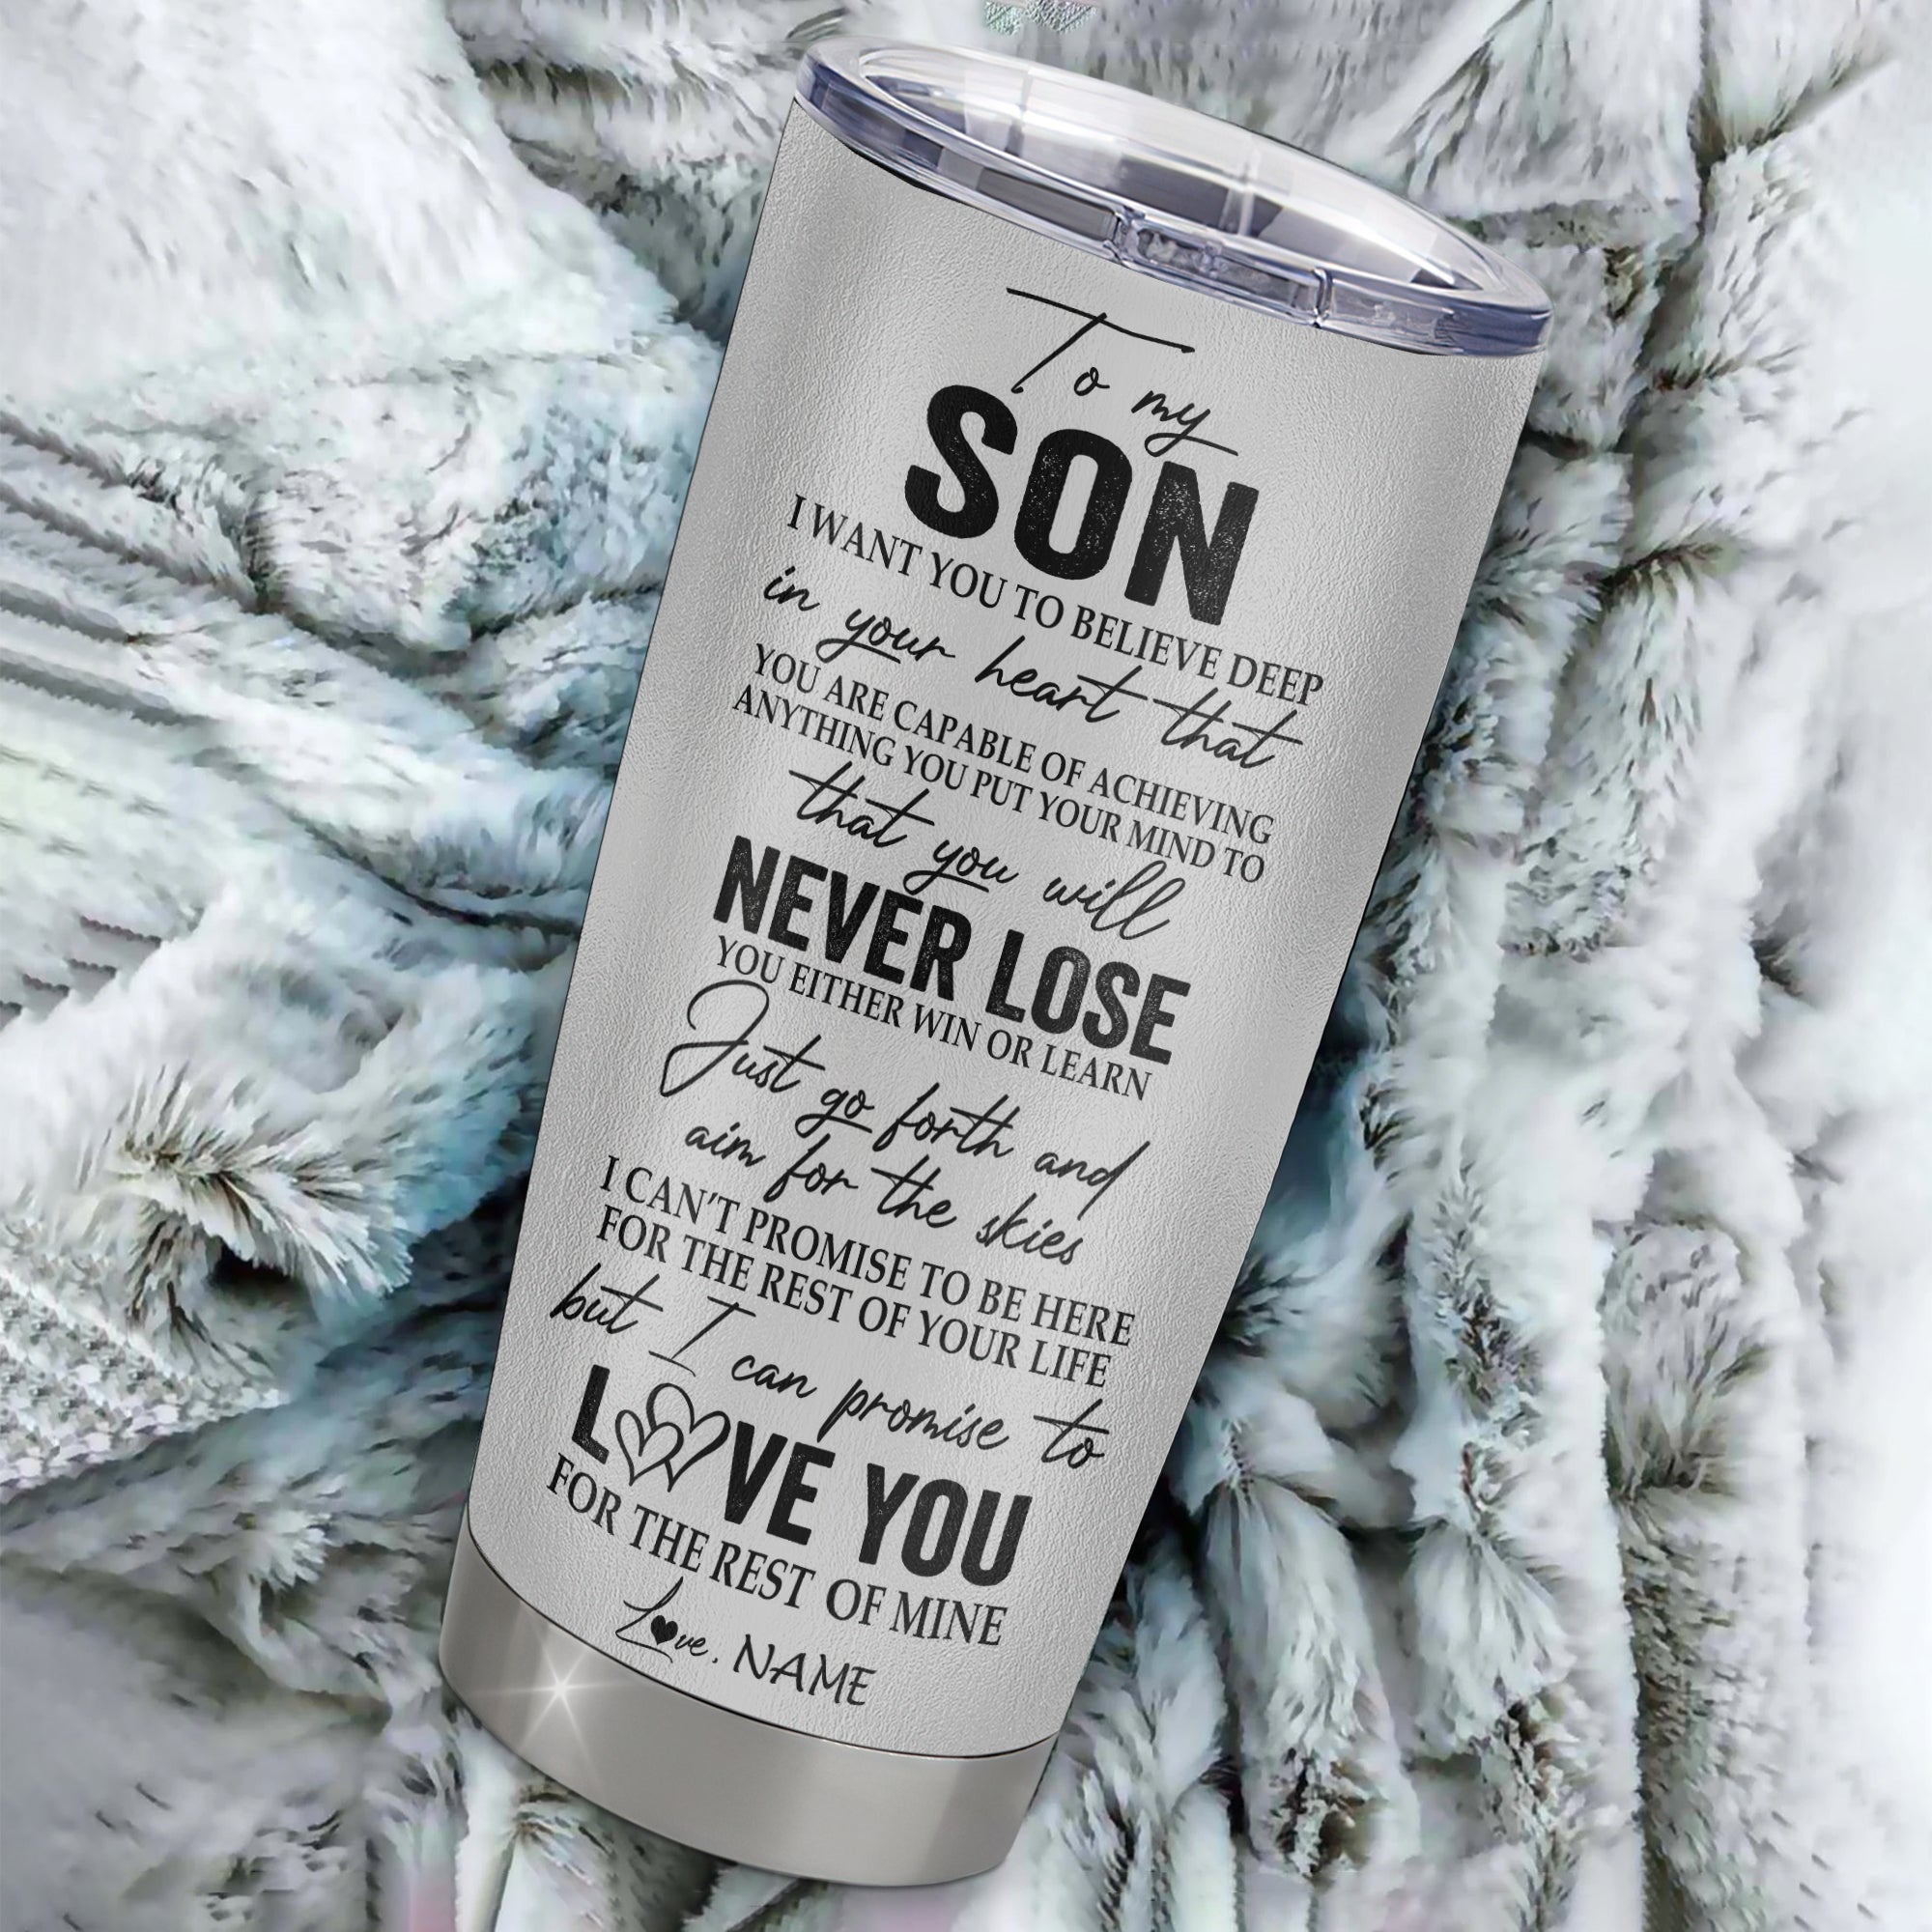 To my son in Law Tumbler 20oz - Gift For Son - Birthday Gift From Dad